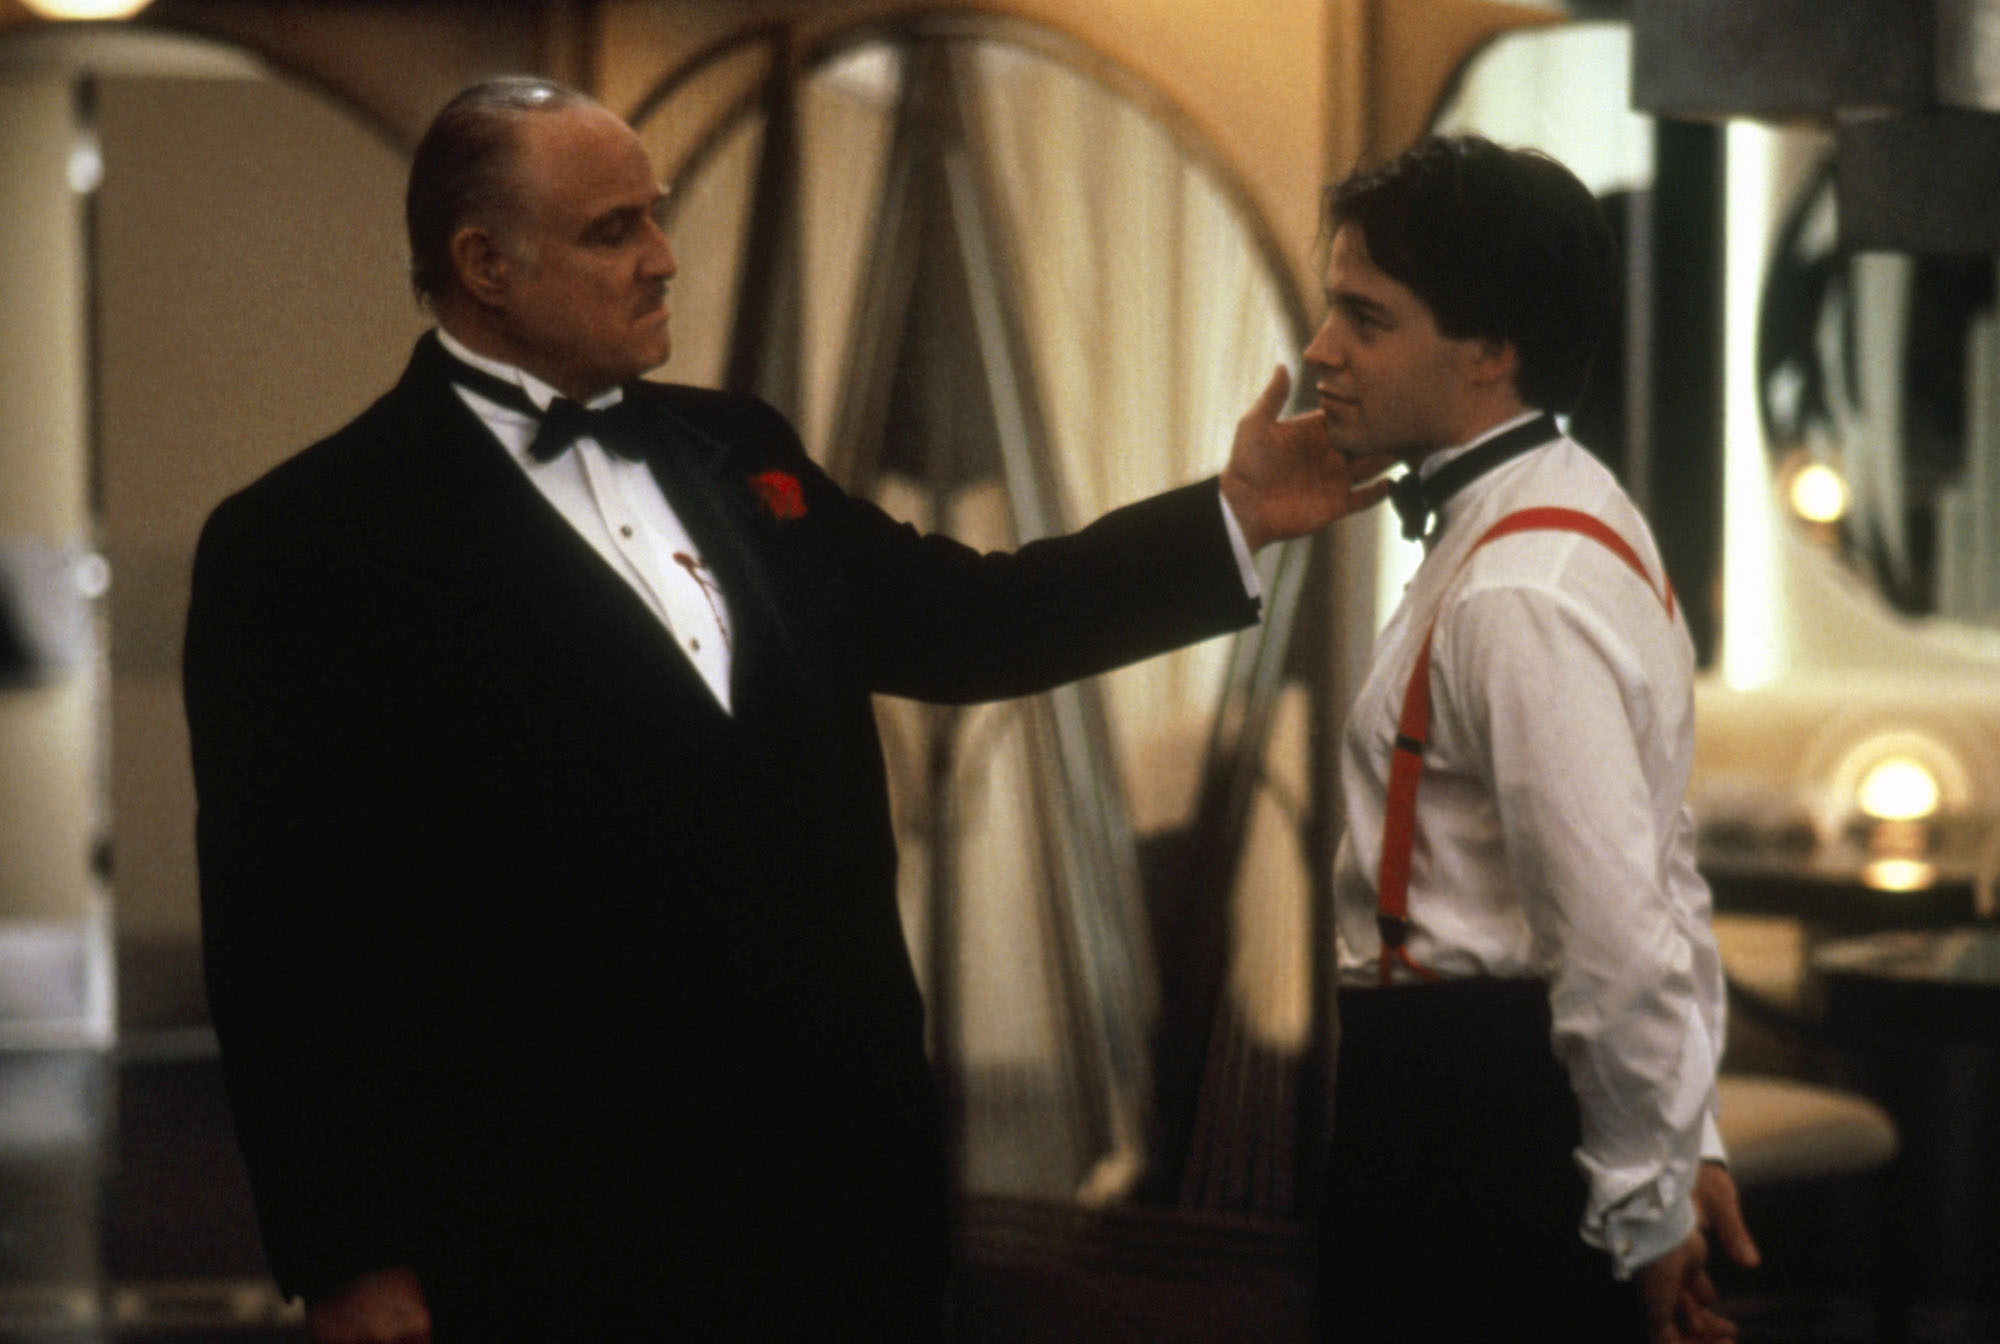 image from the 1990 movie "The Freshman." On the left is Marlon Brando, wearing a tuxedo. He is reachout and touching the cheek of Matthew Broderick's character, on the right and facing Brando and wearing a tuxedo shirt (his jacket is off).